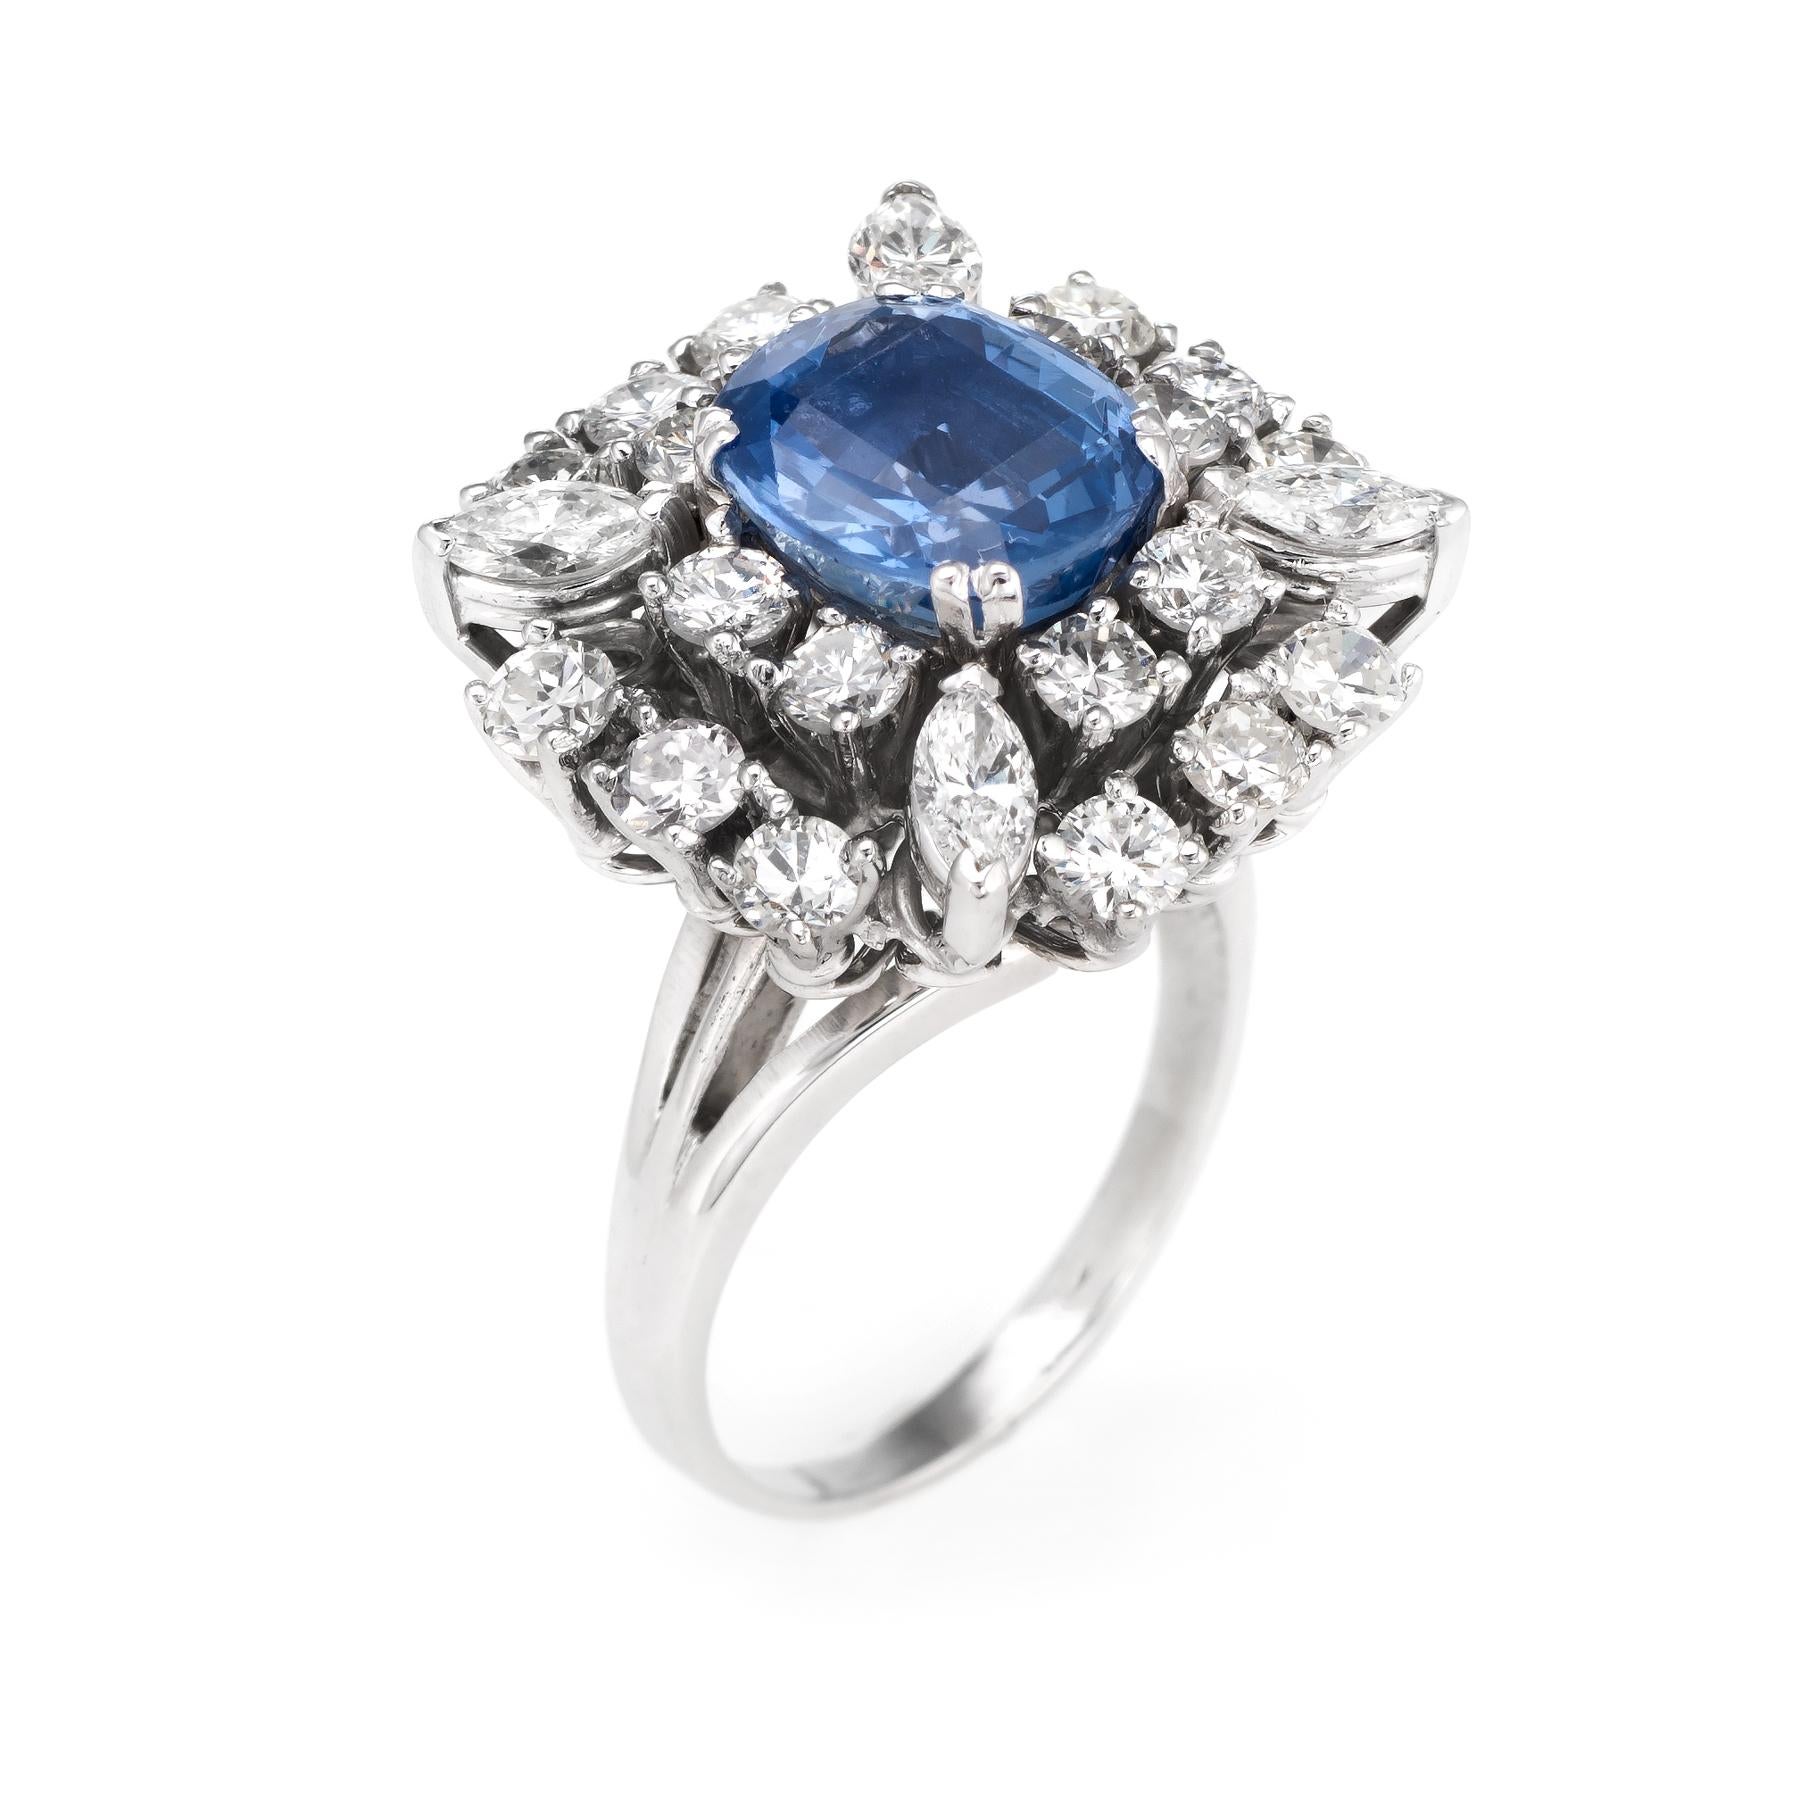 Circa 1950, a large statement cocktail of square cluster design is crafted in 18 karat white gold. 

One oval shaped mixed cut Natural Sapphire weighs approx. 4.10 carats (9.38 x 8.85 x 5.60), medium blue color, nearly flawless, good cut. Color and